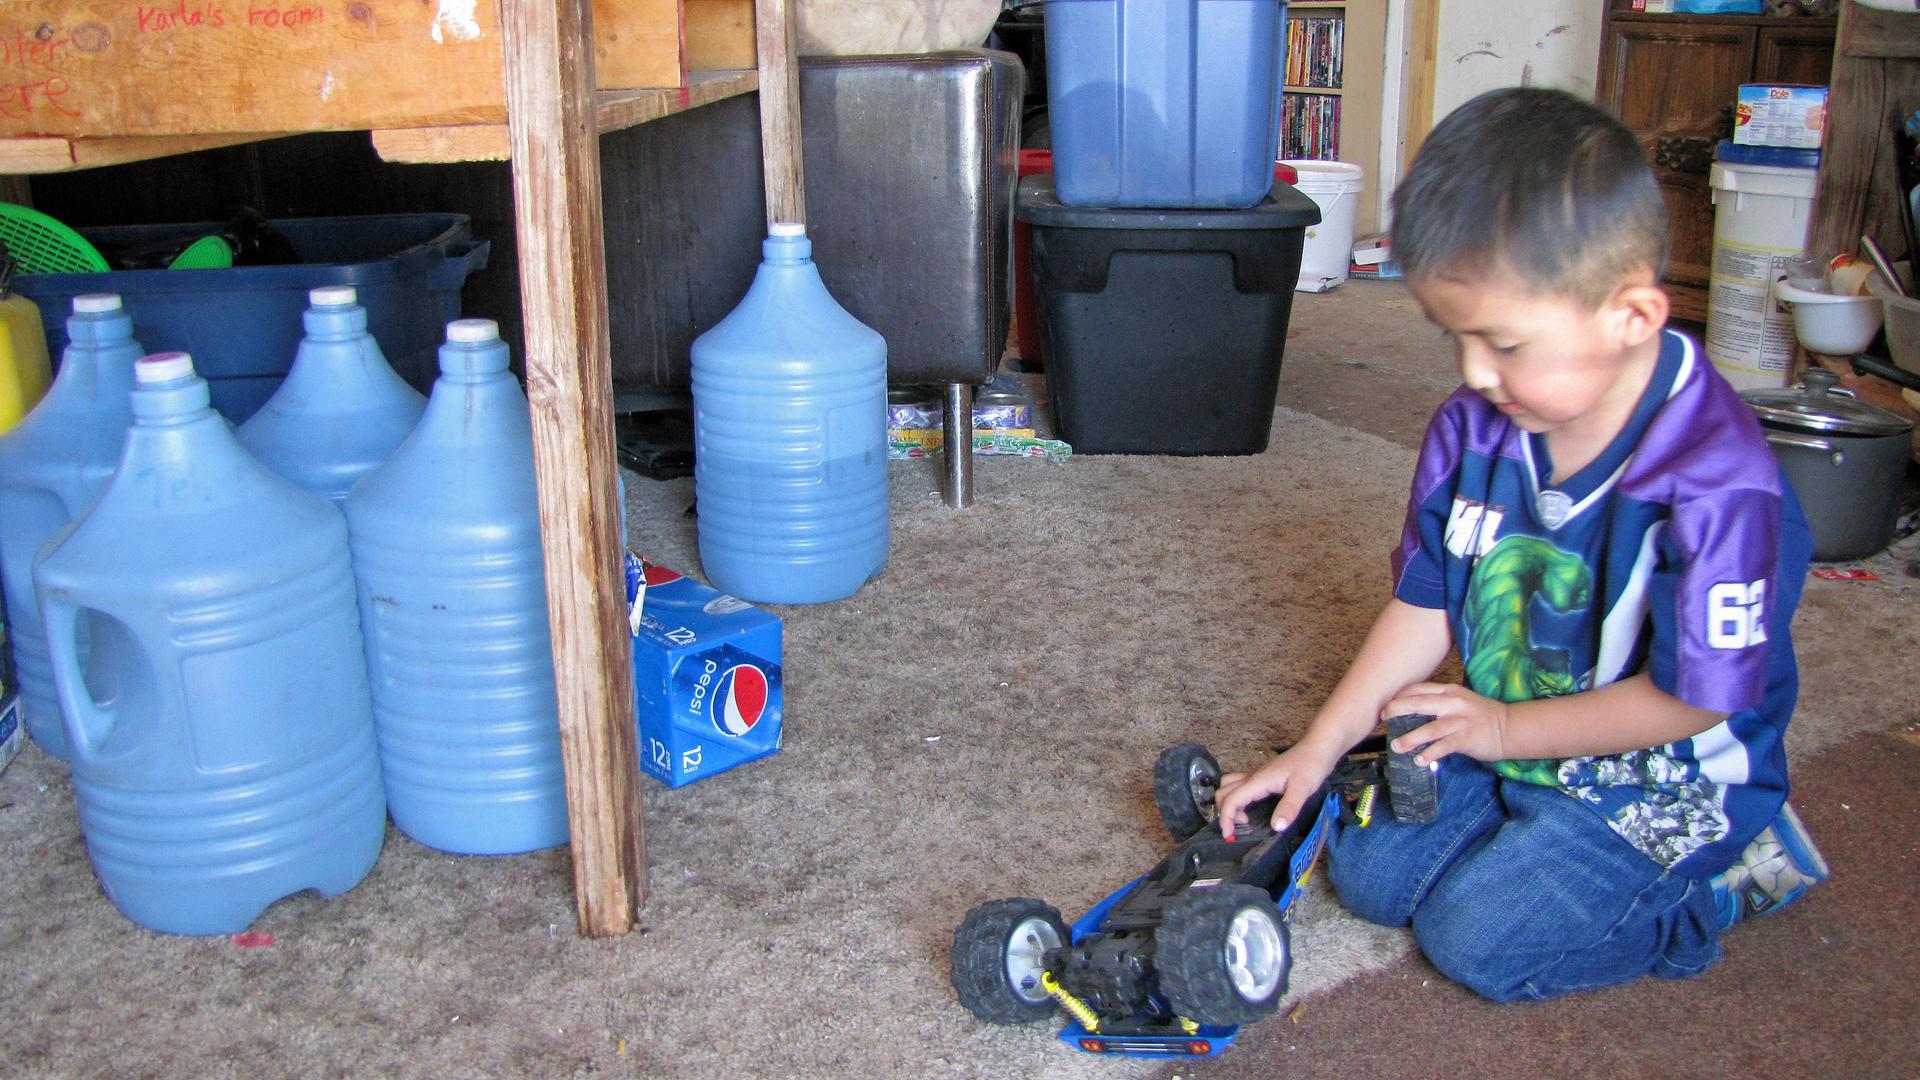 LaTanya Dickson's family has to travel 20 miles to get clean water, which they store in jugs under the kitchen table of their hogan on the Navajo Nation in northern Arizona.